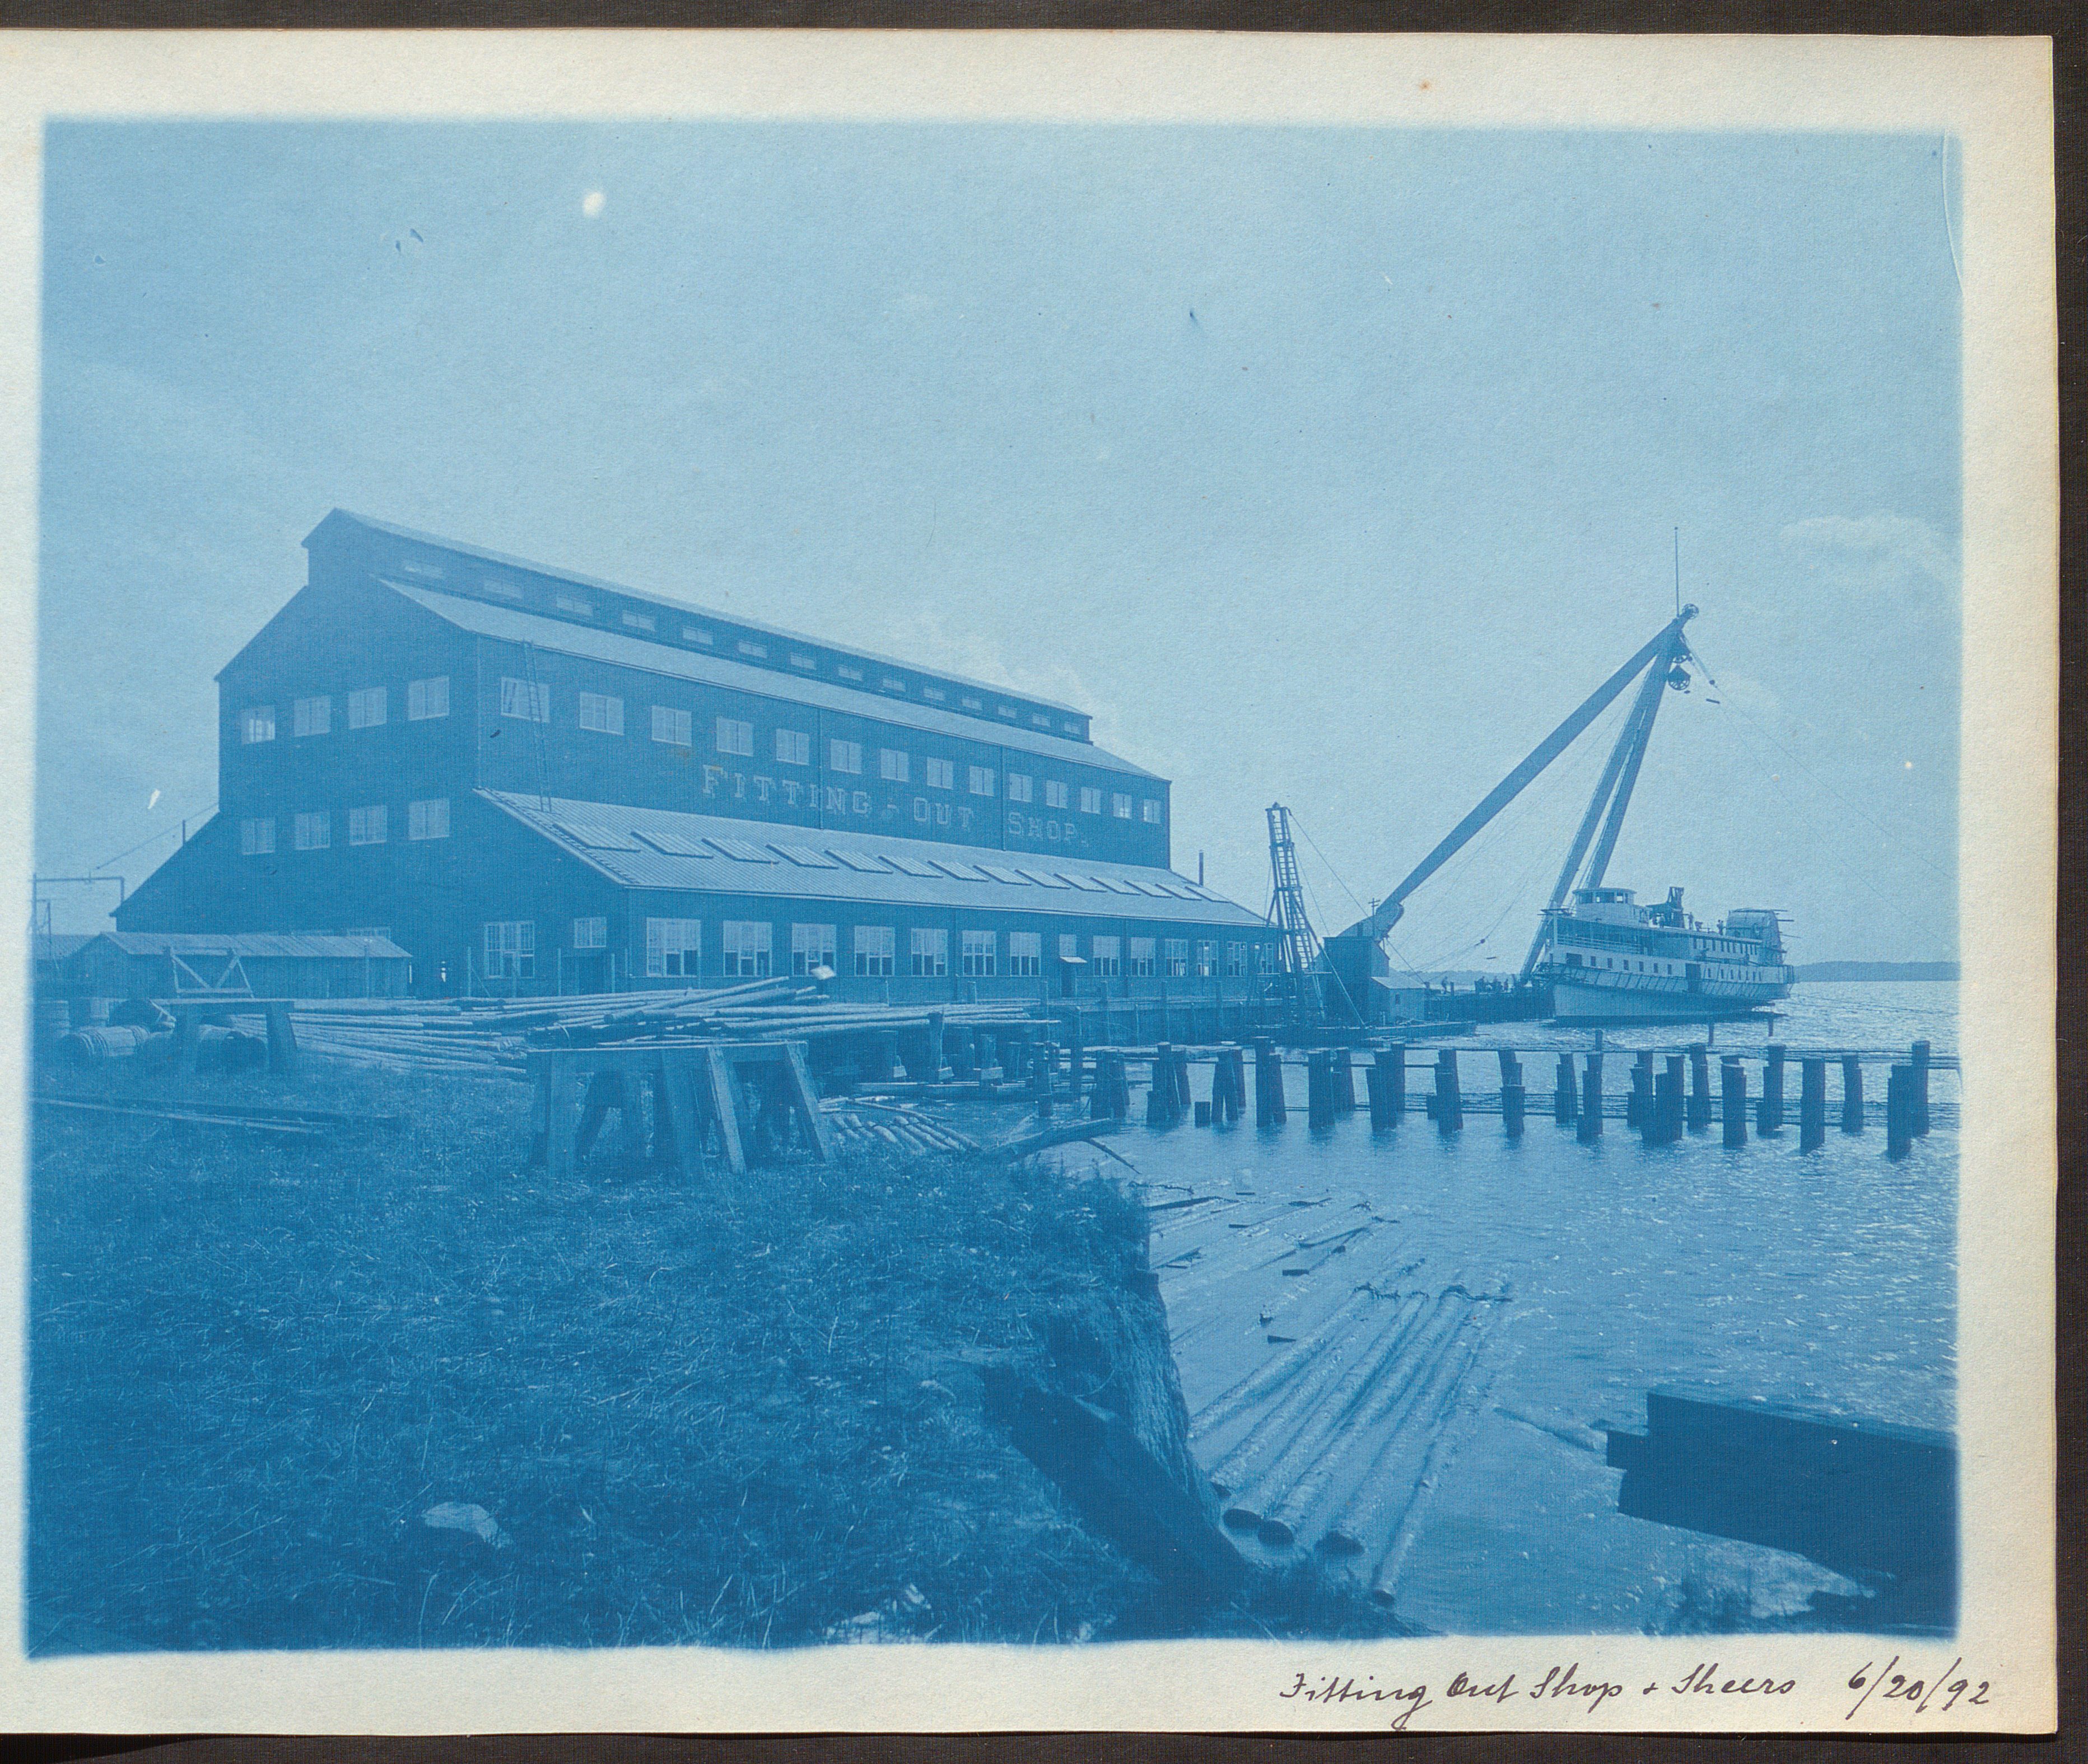 Cyanotype photograph showing a shipyard's fitting out shop and sheers